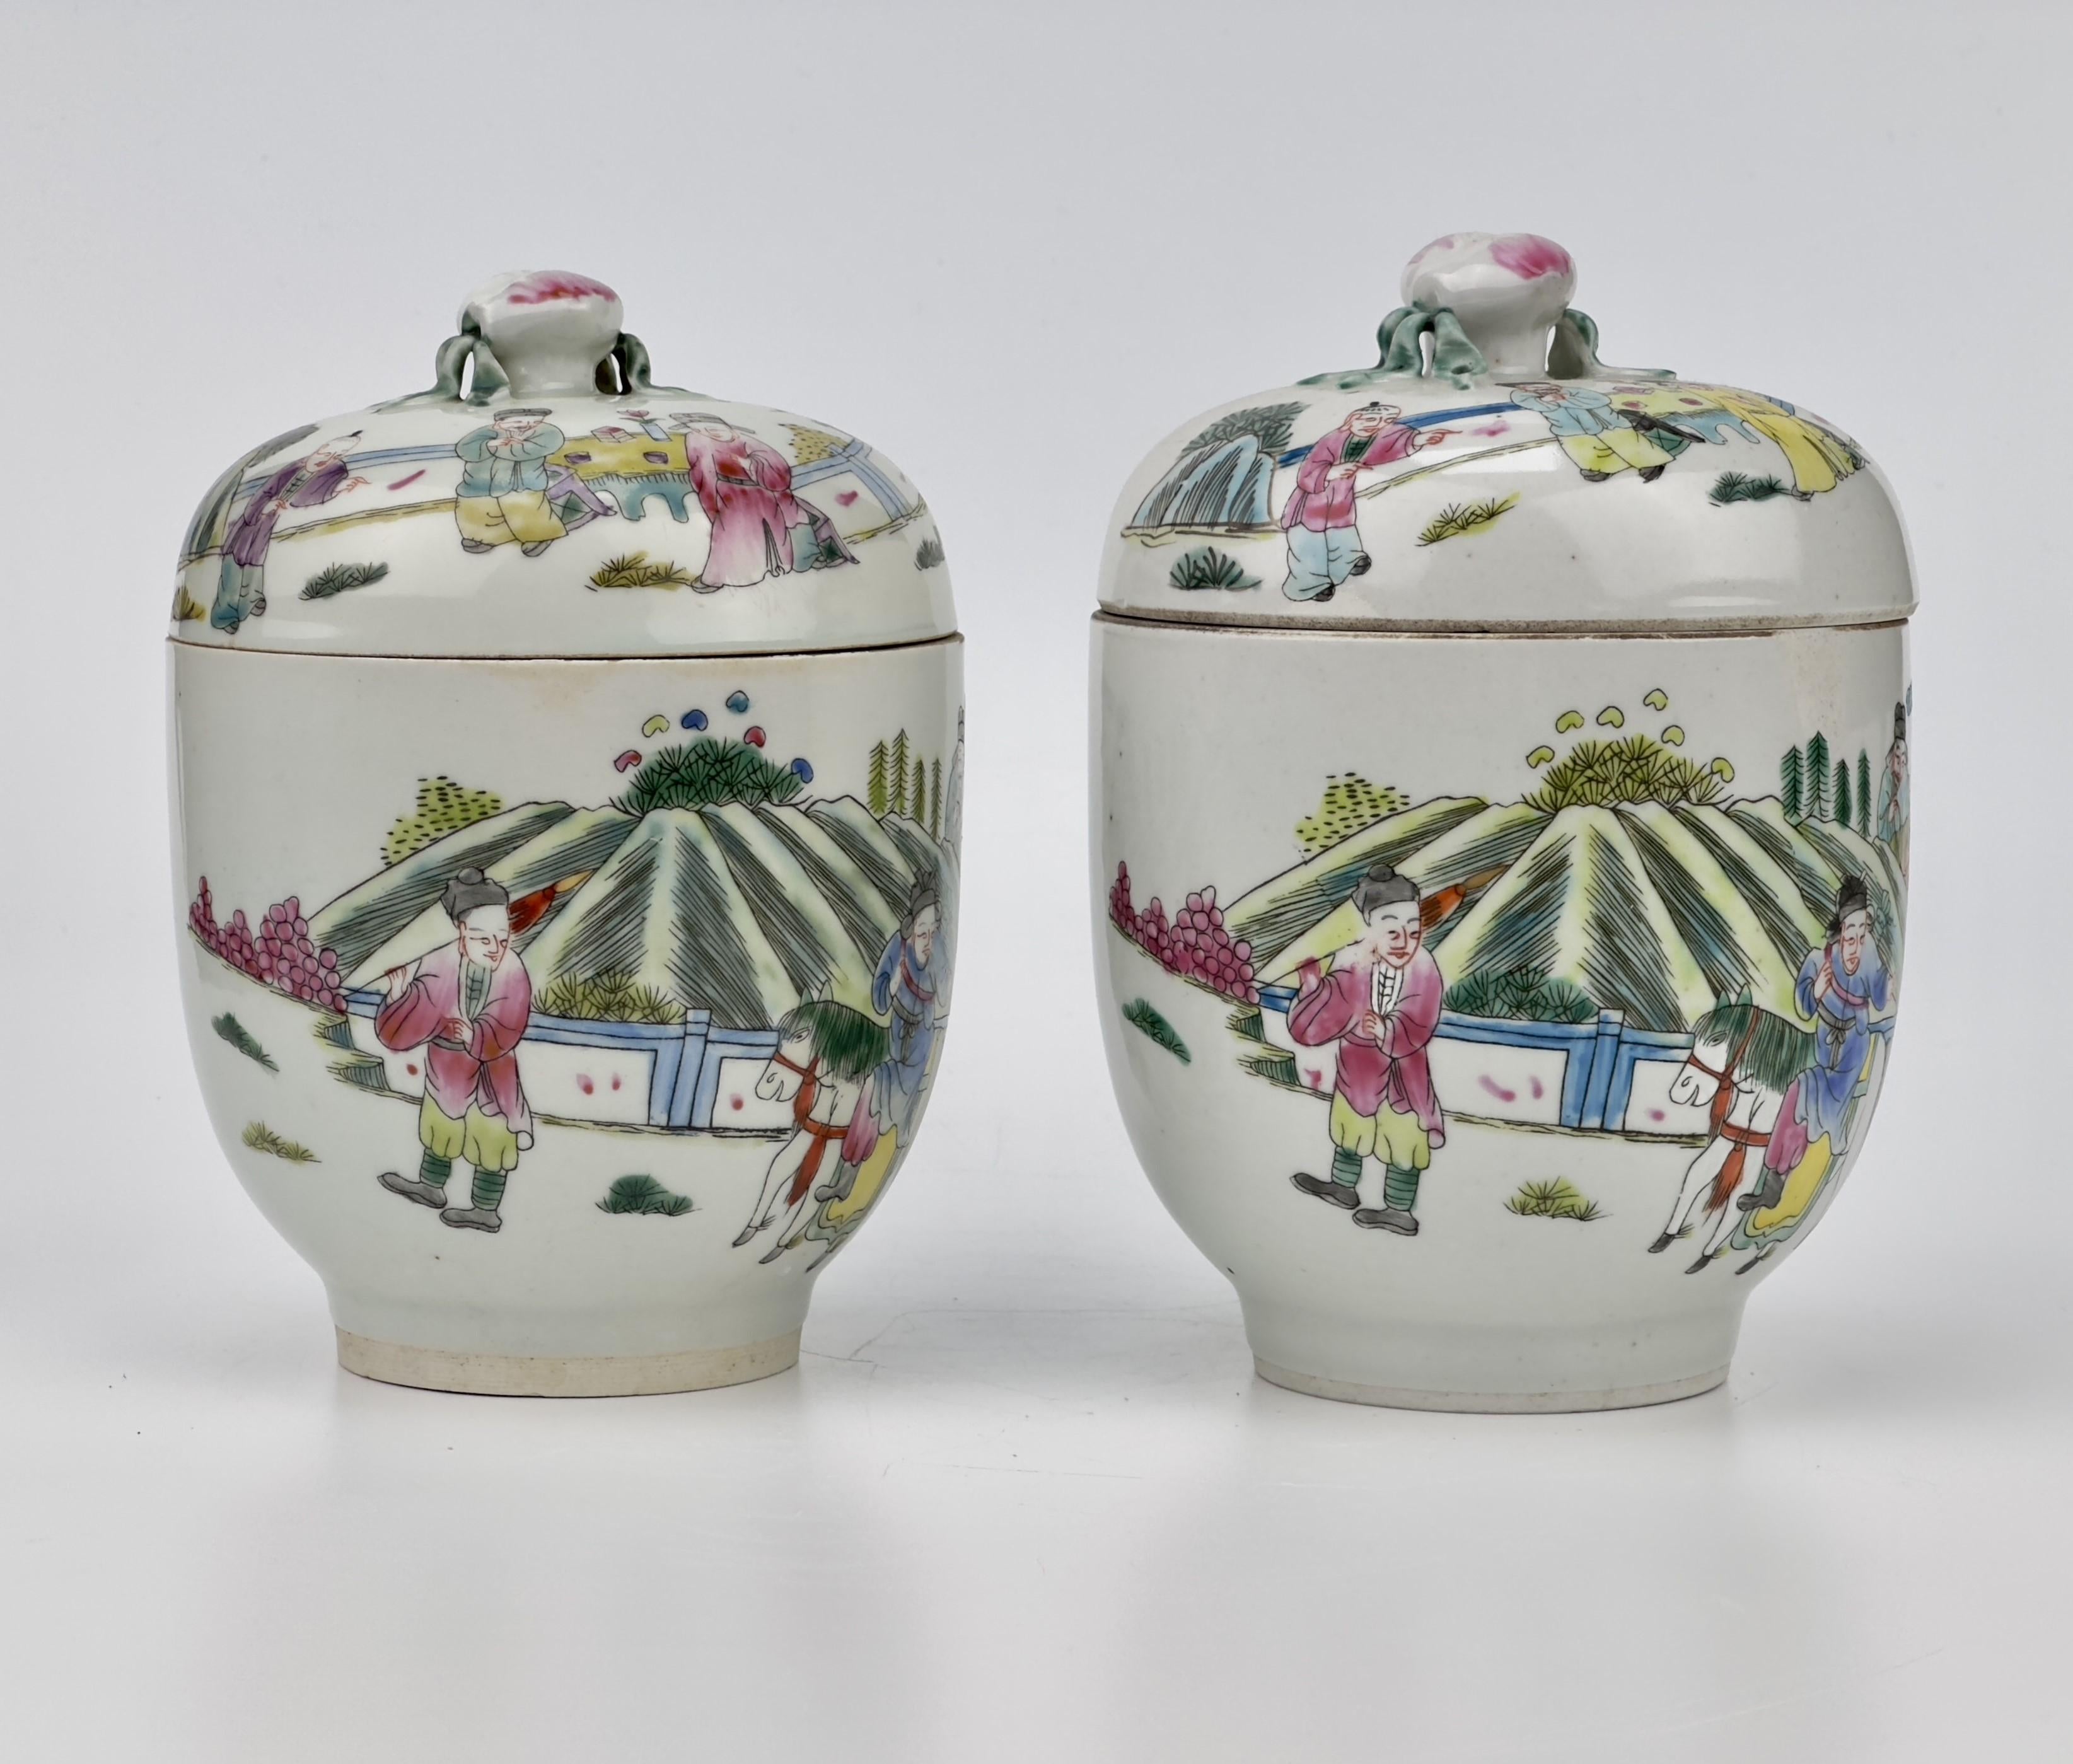 These small, oval-shaped jars feature vibrant and striking enamels characteristic of famille verte porcelain. Crafted from an exceptionally refined paste, it belongs to a superior quality of ceramic ware. Famille verte is distinguished by its